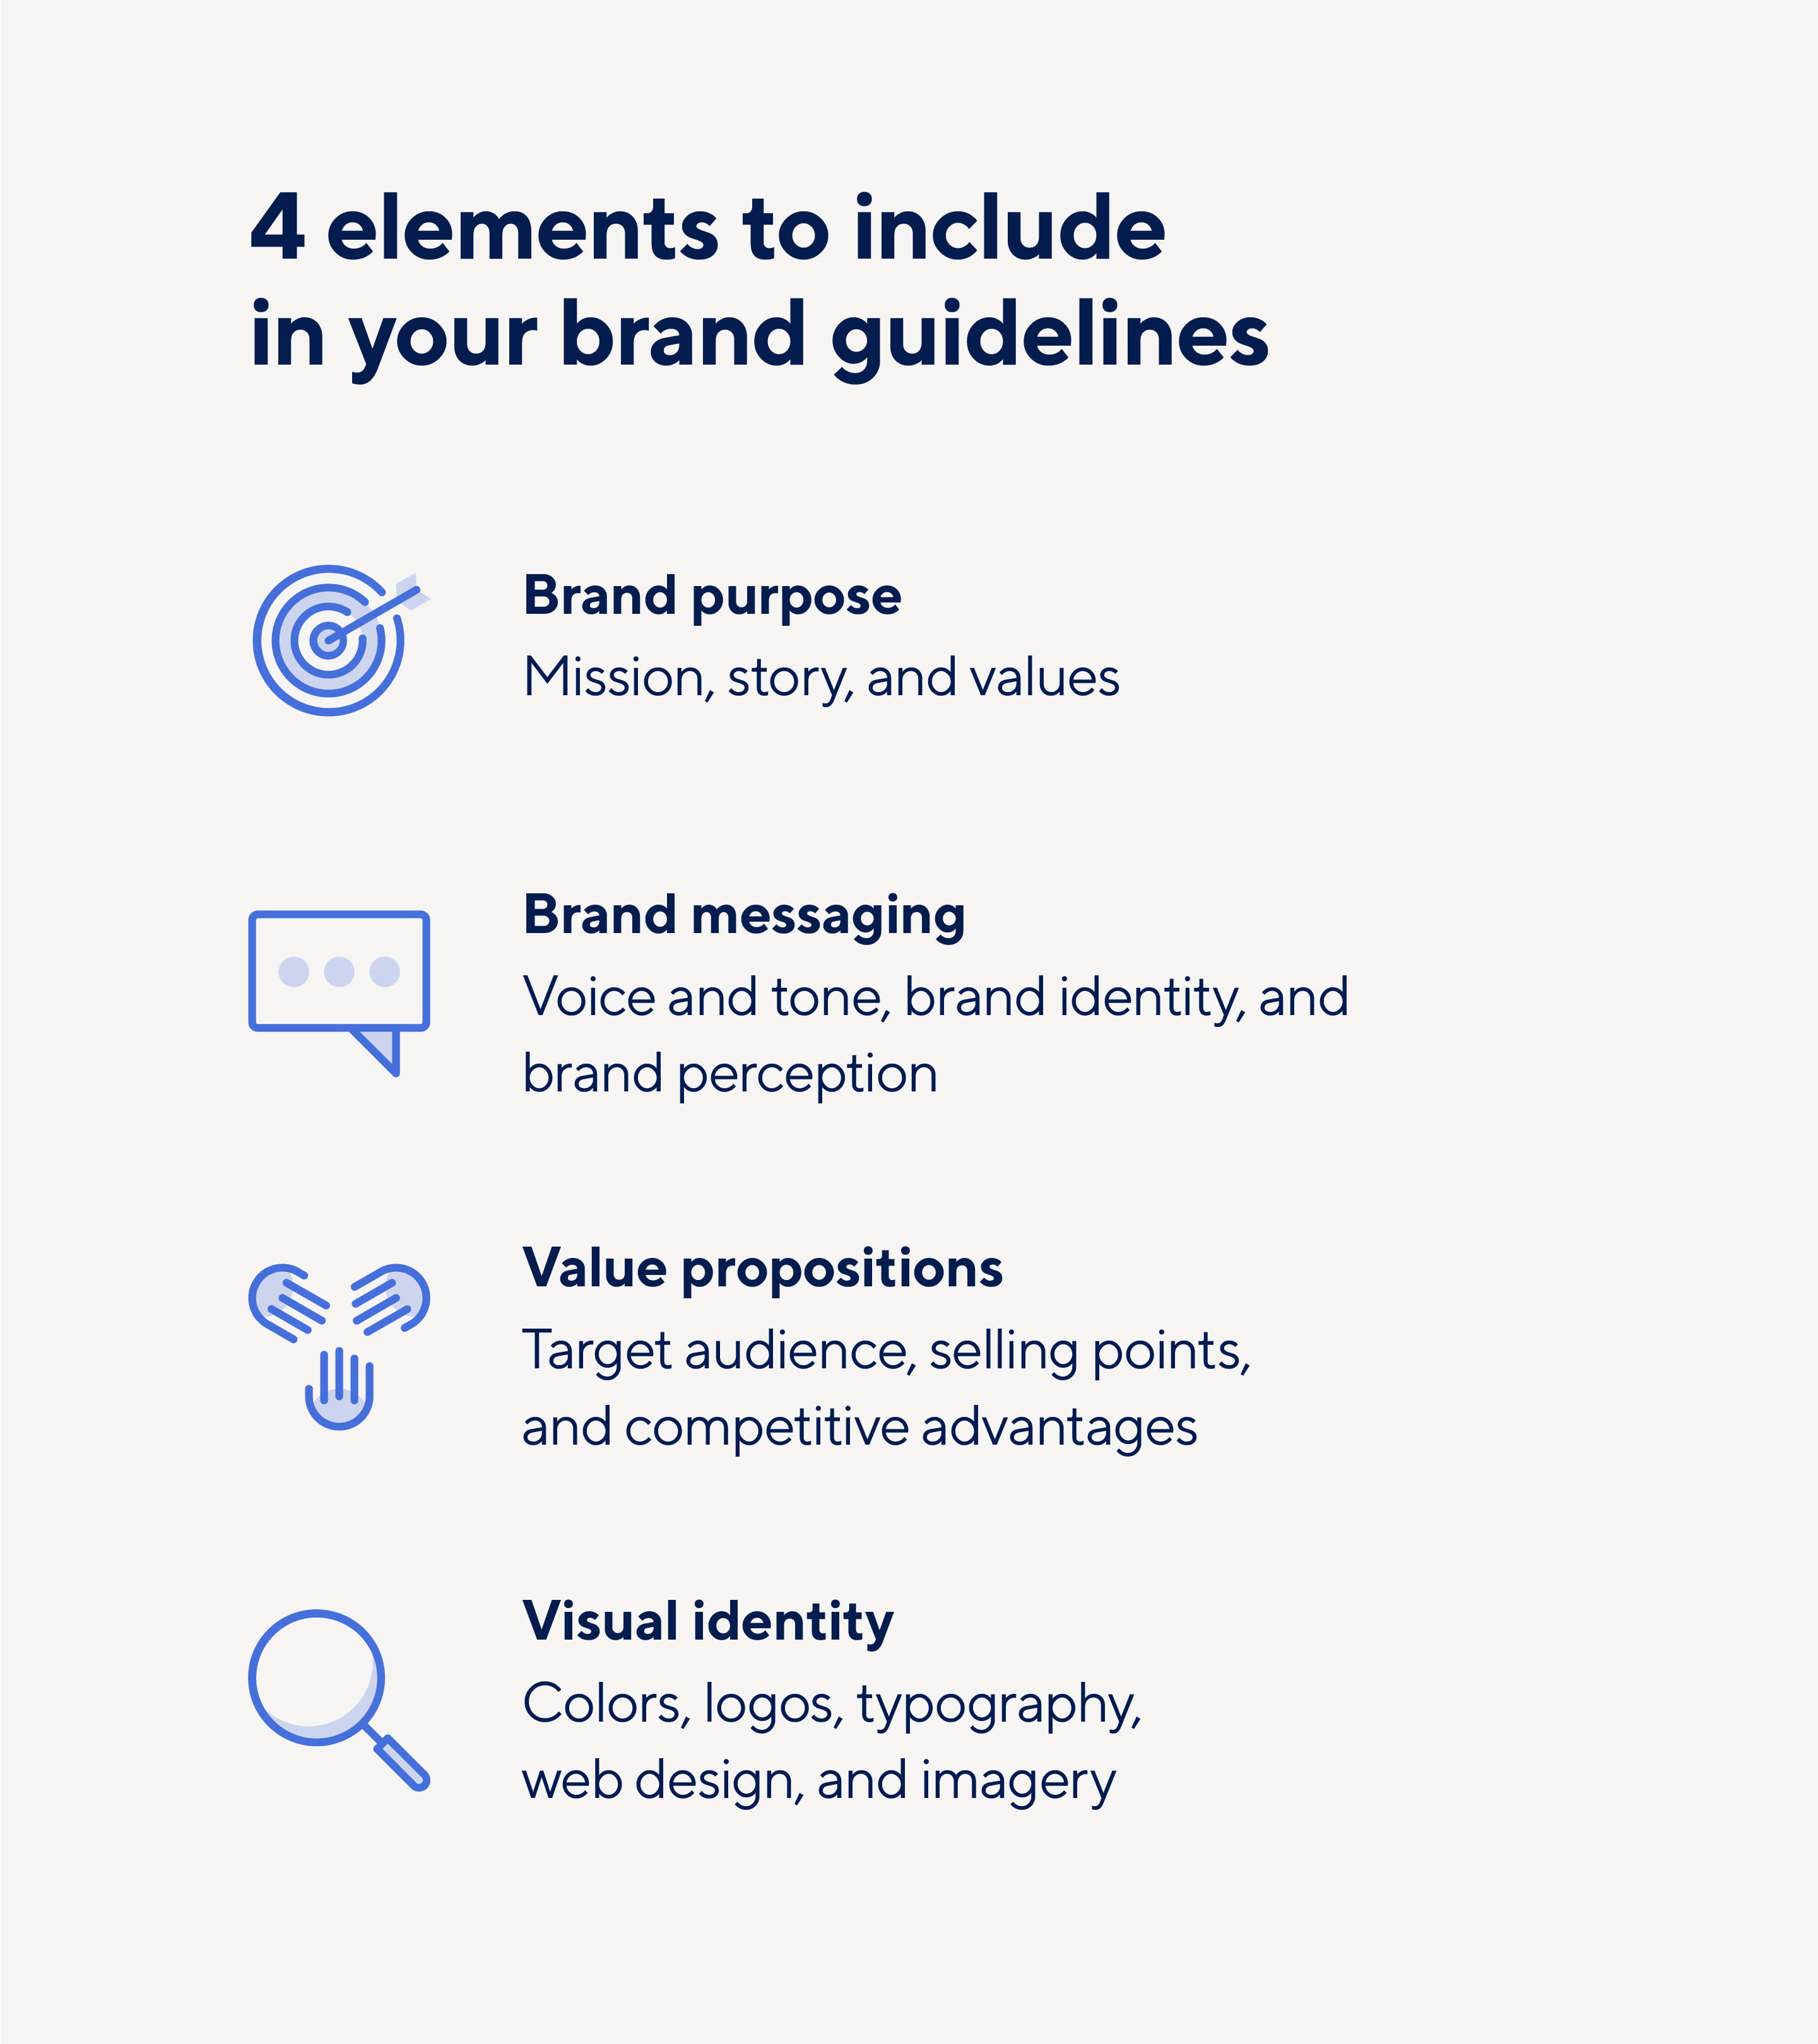 Elements to include in your brand guidelines to maintain brand compliance.